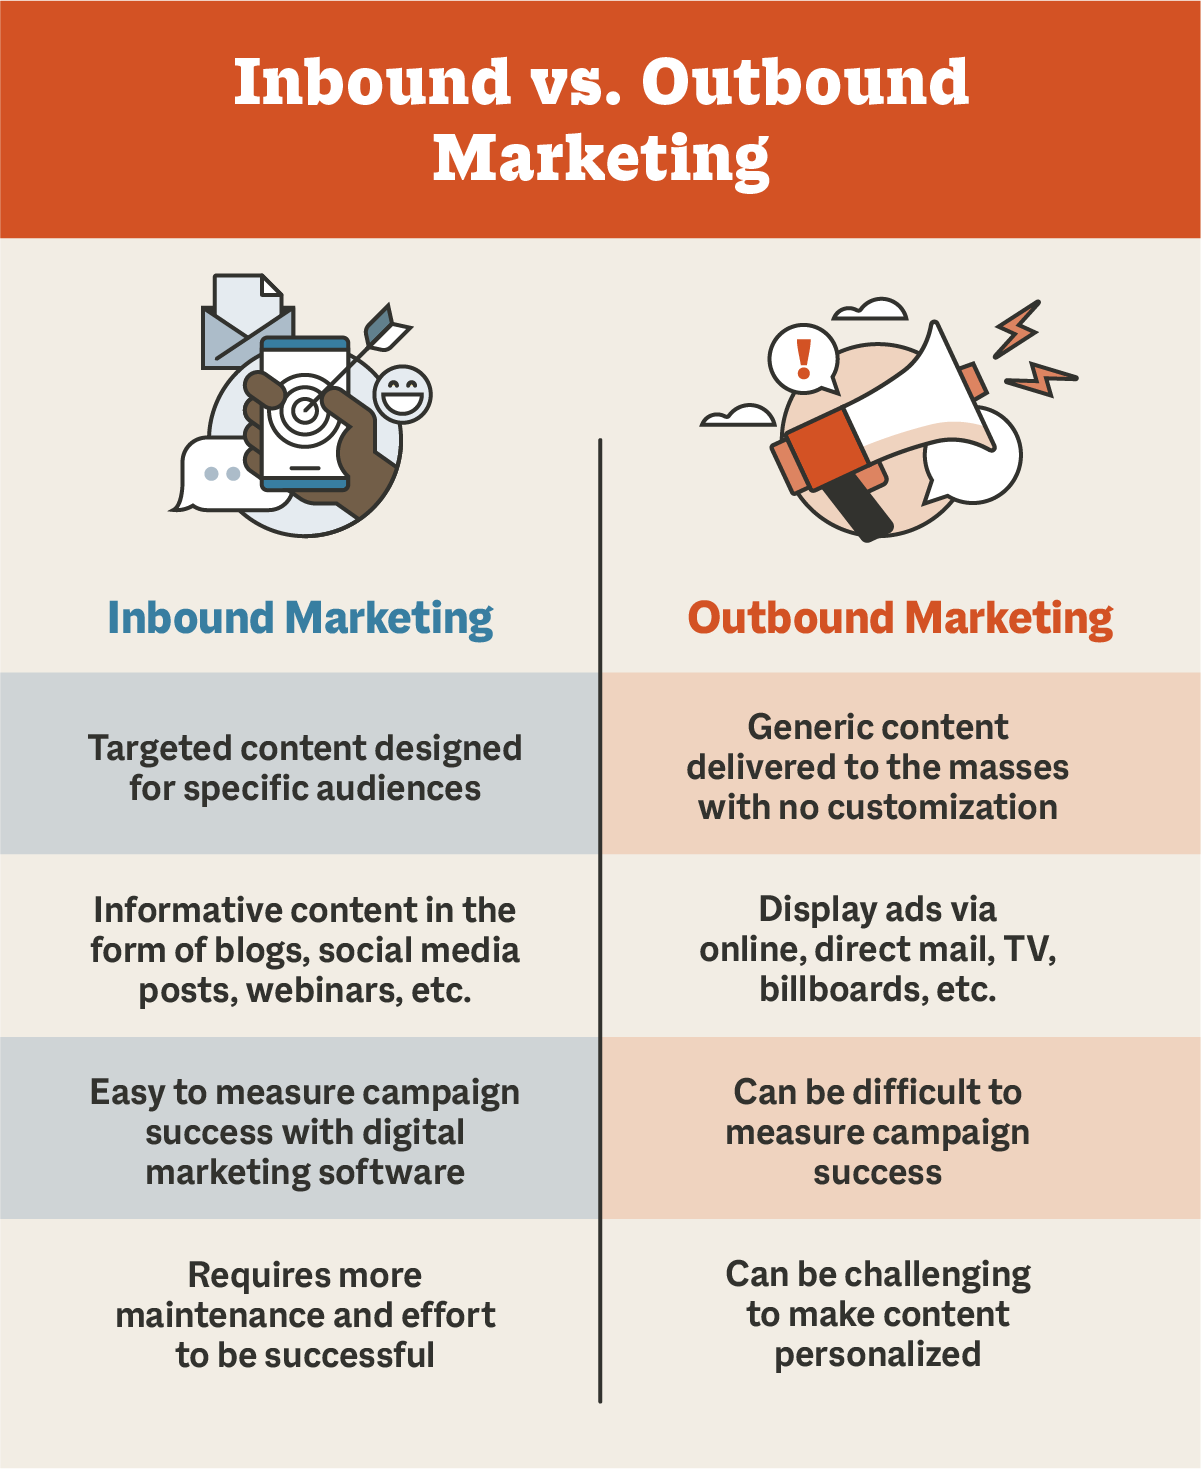 What is Inbound Marketing and Outbound Marketing?